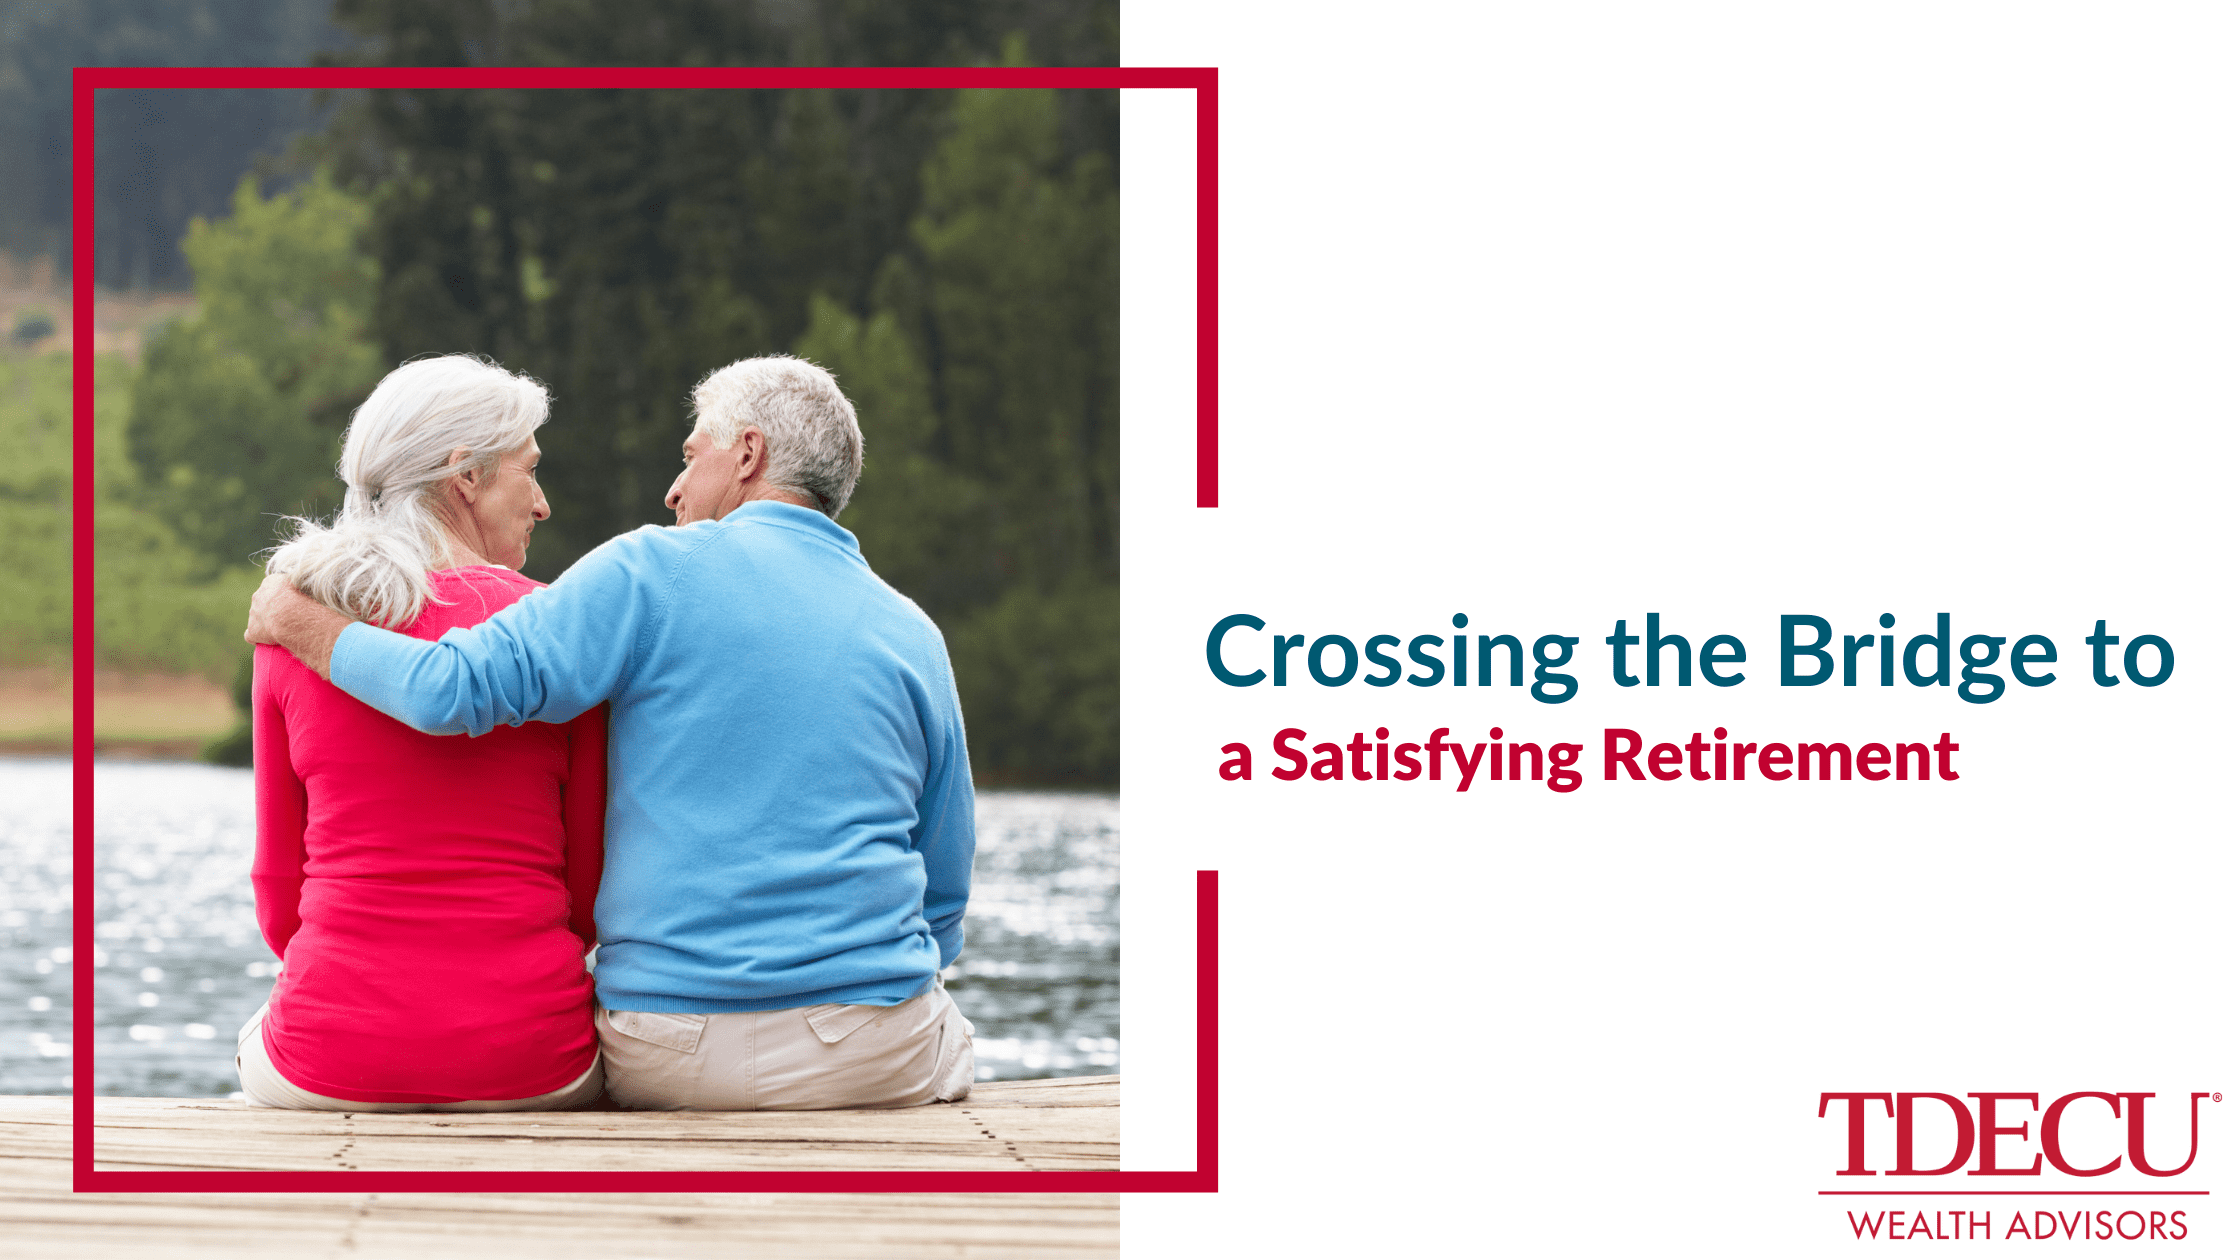 Crossing the Bridge to a Satisfying Retirement